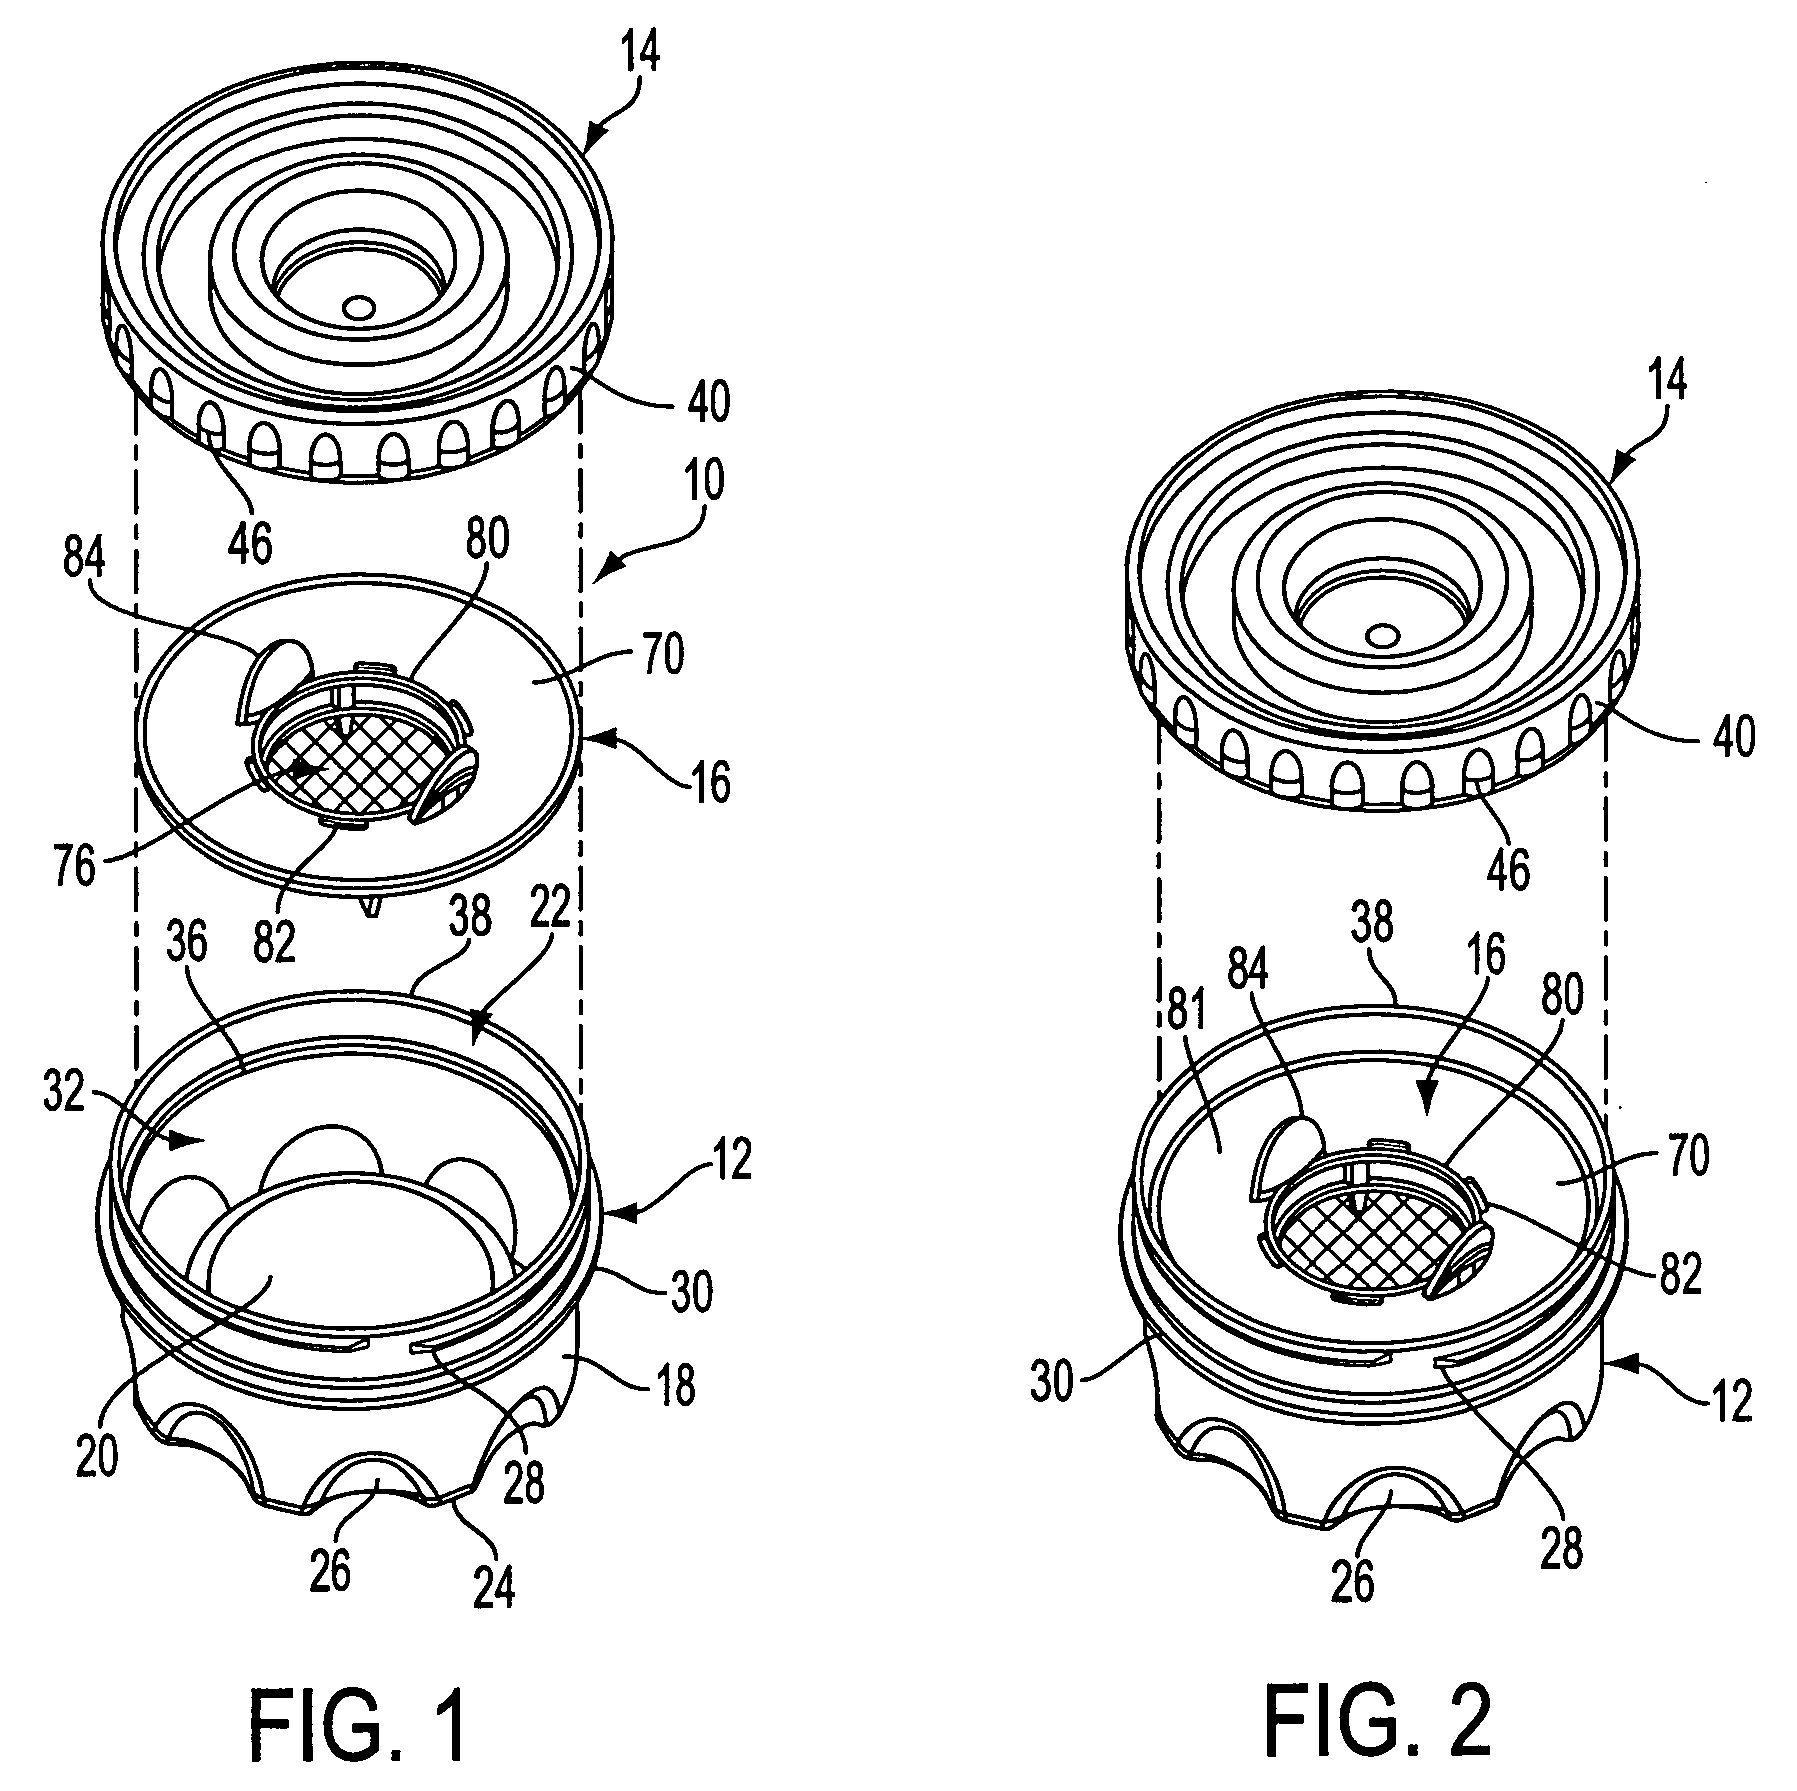 Method and apparatus for transporting biological samples